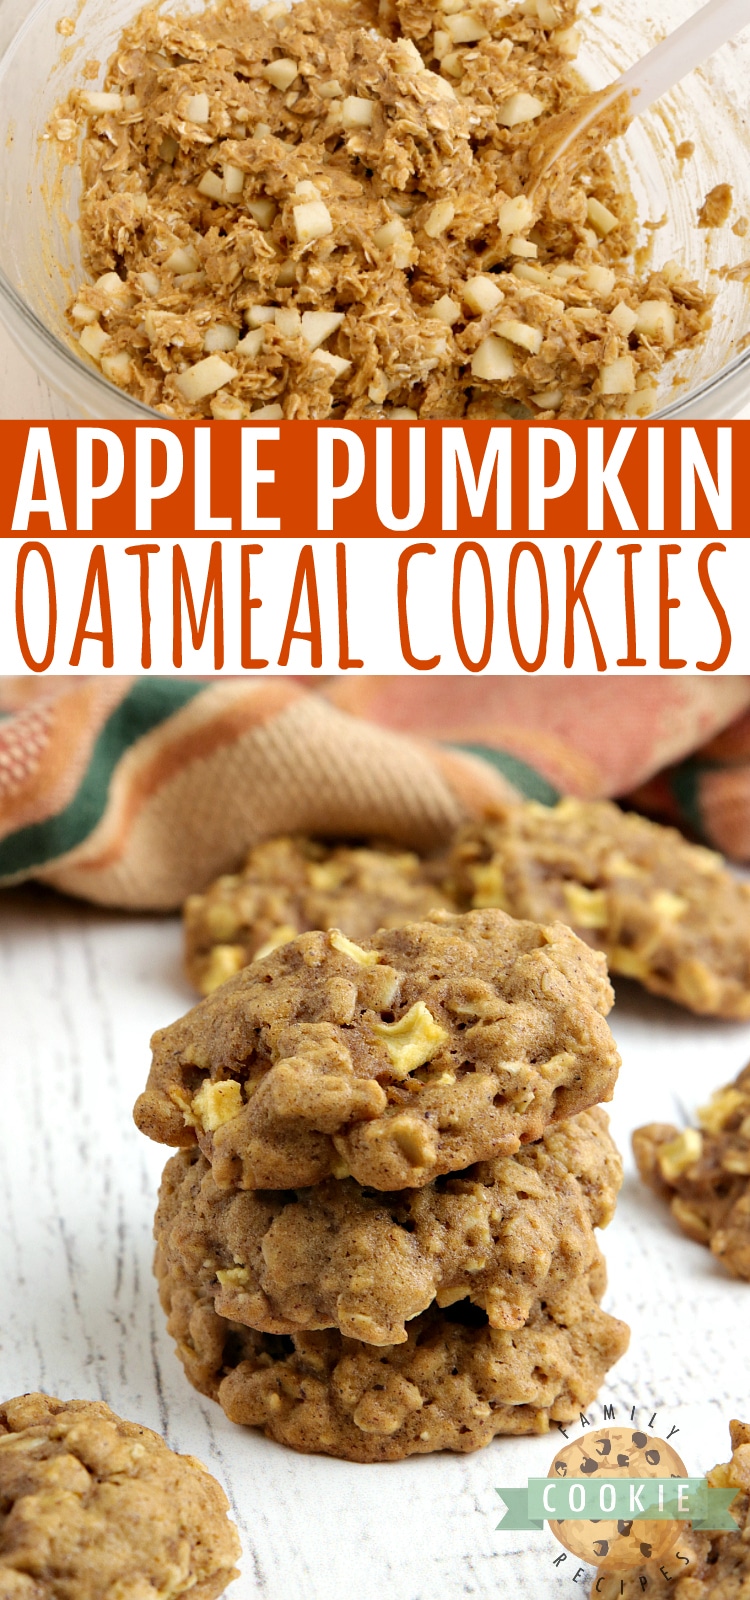 Apple Pumpkin Oatmeal Cookies are thick, soft, chewy and full of pumpkin flavor and fresh apples. The perfect cookie recipe for fall! via @buttergirls